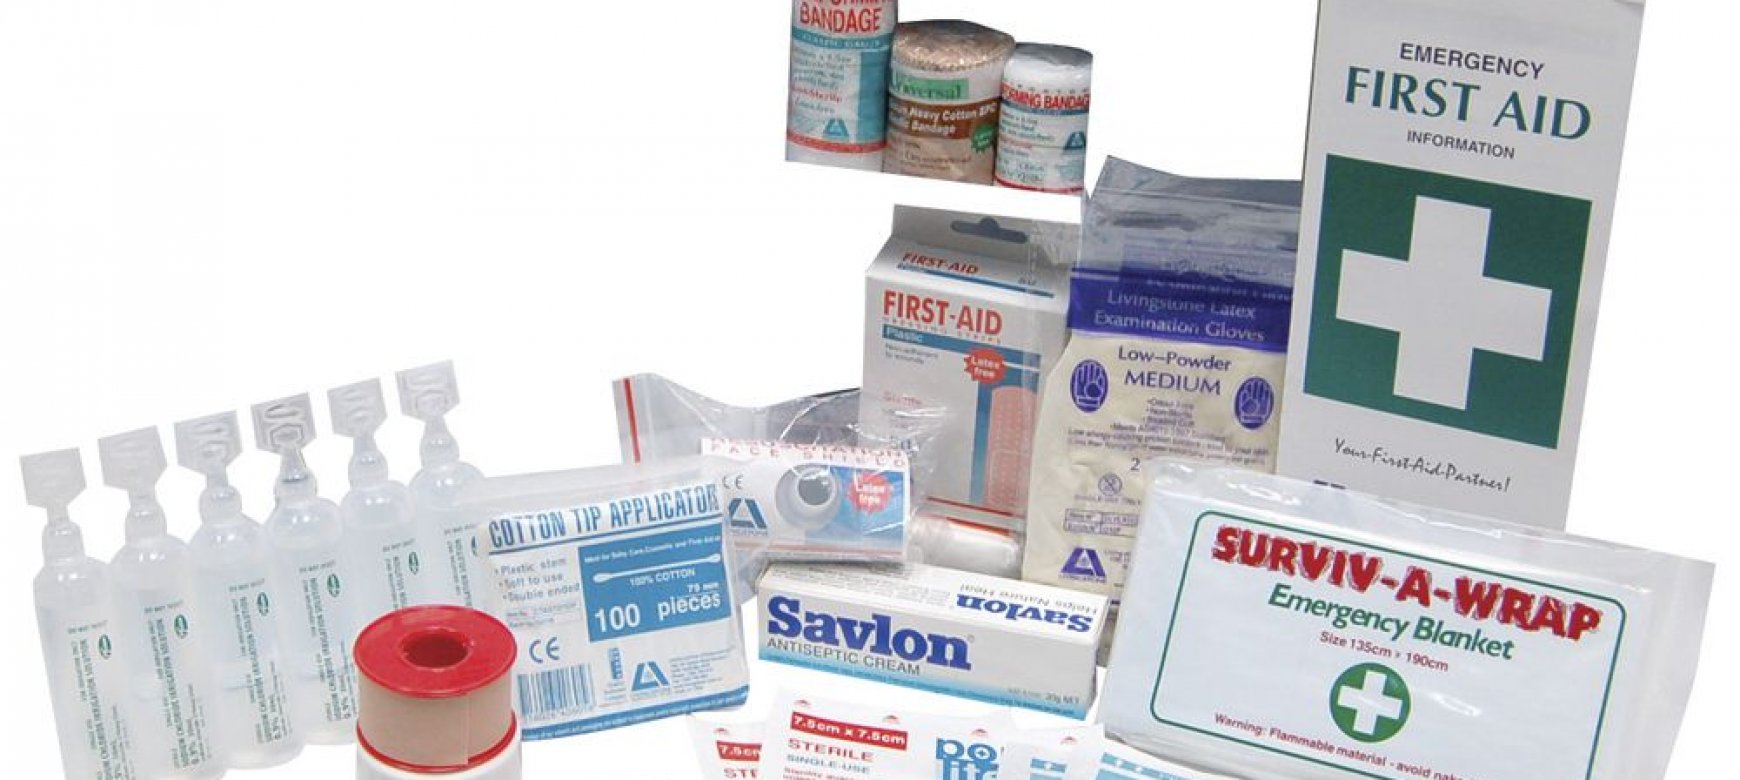 What does a first aid kit include?